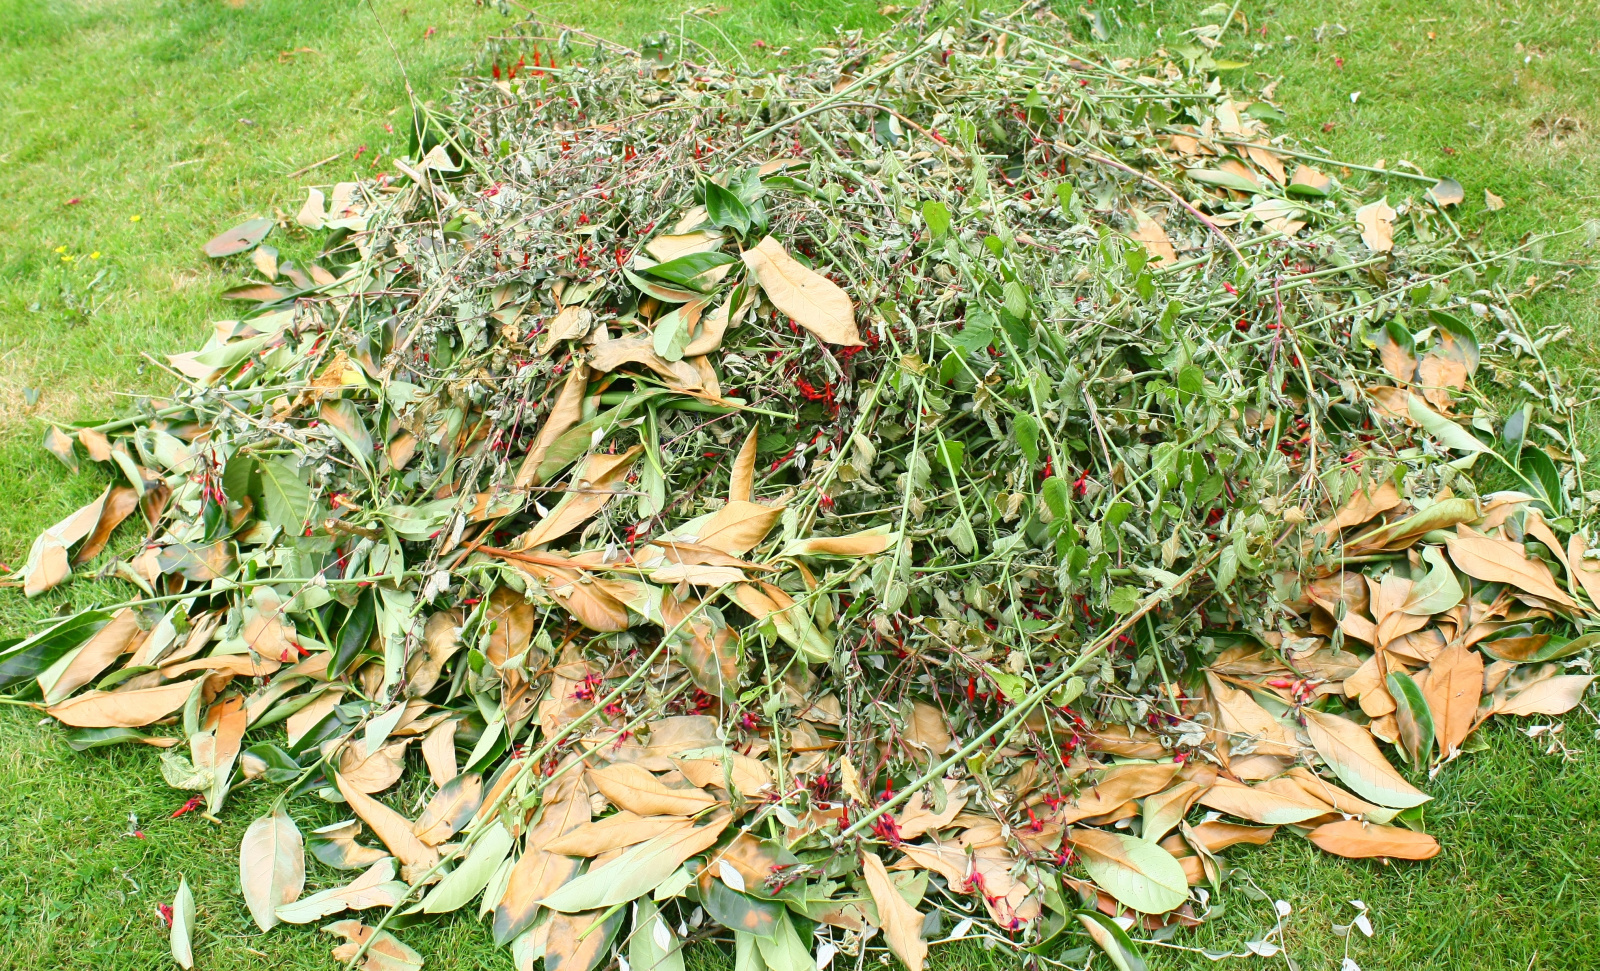 Green Waste Pile